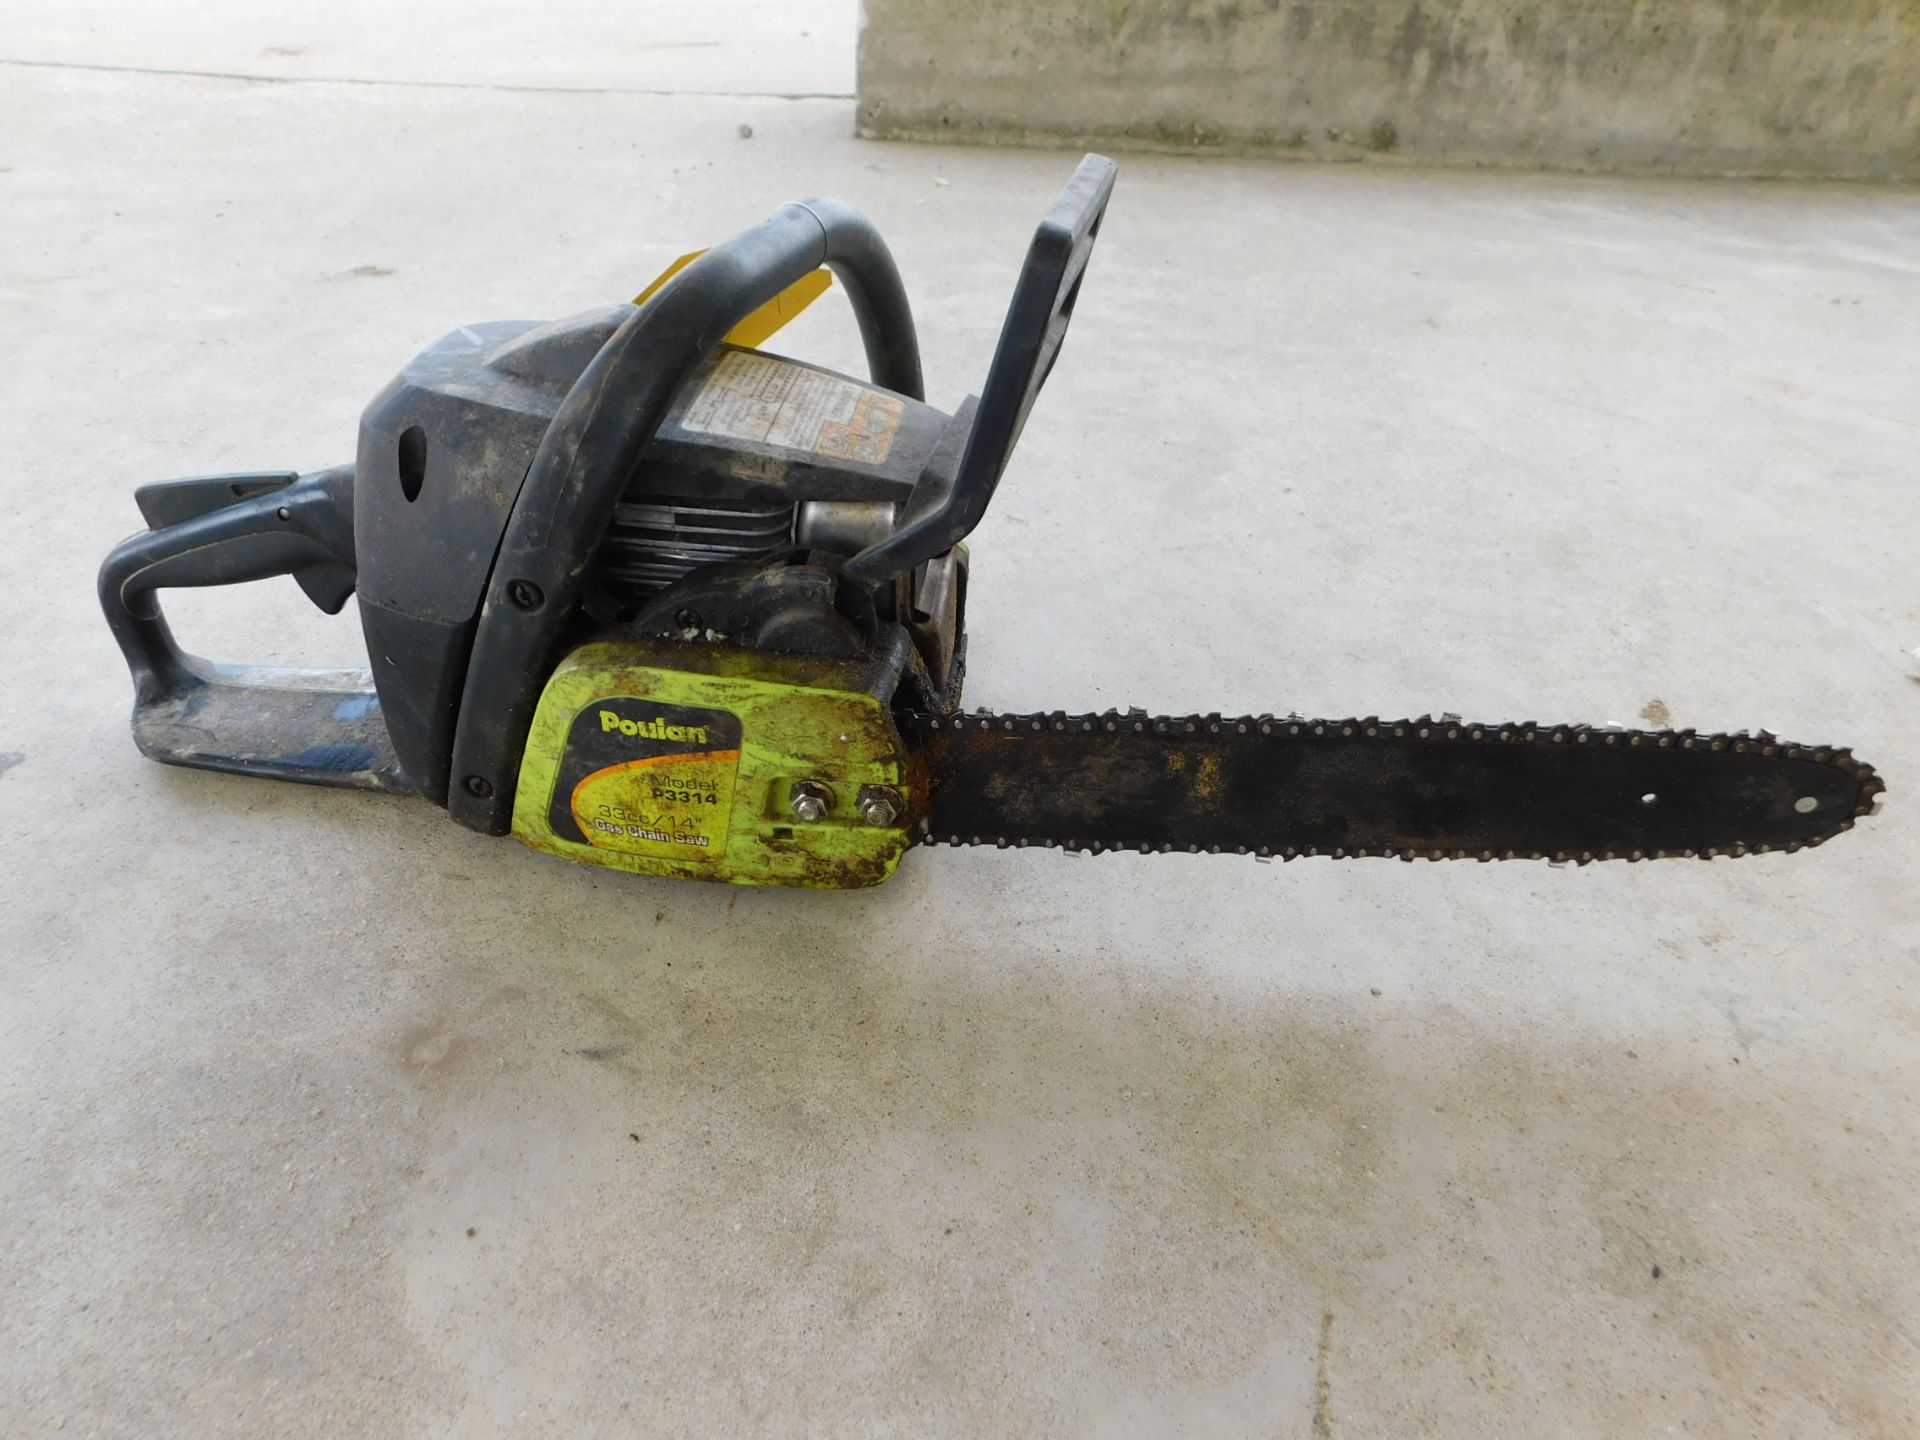 Poulan Model P3314 14" Gas-Powered Chain Saw-Runs, BUT Clutch is Sticking